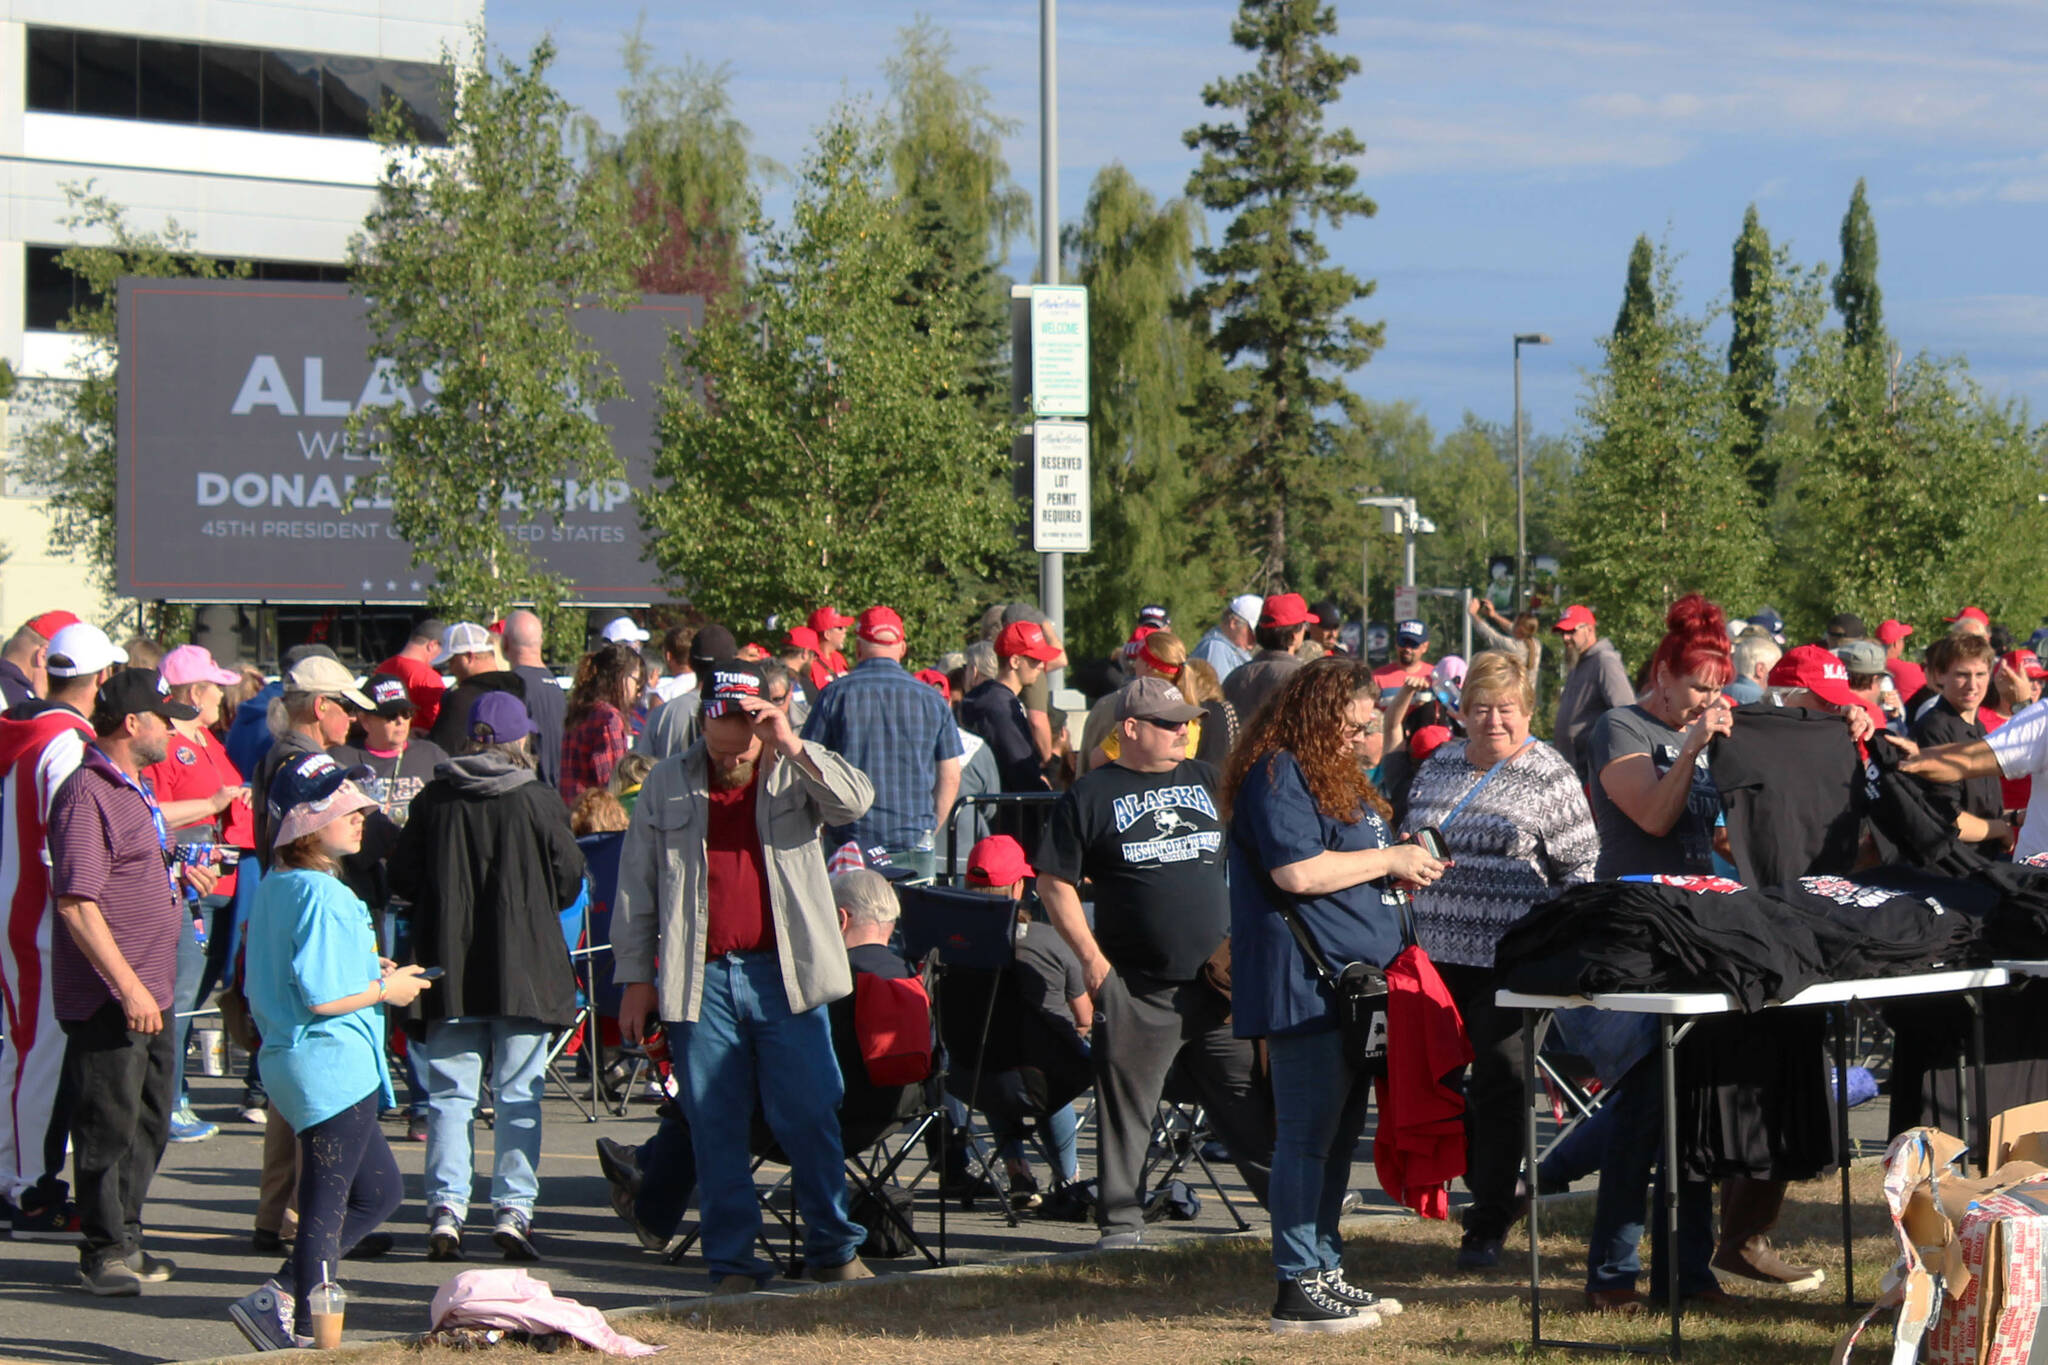 People gather outside of the Alaska Airlines Center, where a Save America rally was being held, on Saturday, July 9, 2022, in Anchorage, Alaska. Former President Donald Trump, U.S. Senate candidate Kelly Tshibaka and U.S. House candidate Sarah Palin were among the event’s speakers. (Ashlyn O’Hara/Peninsula Clarion)